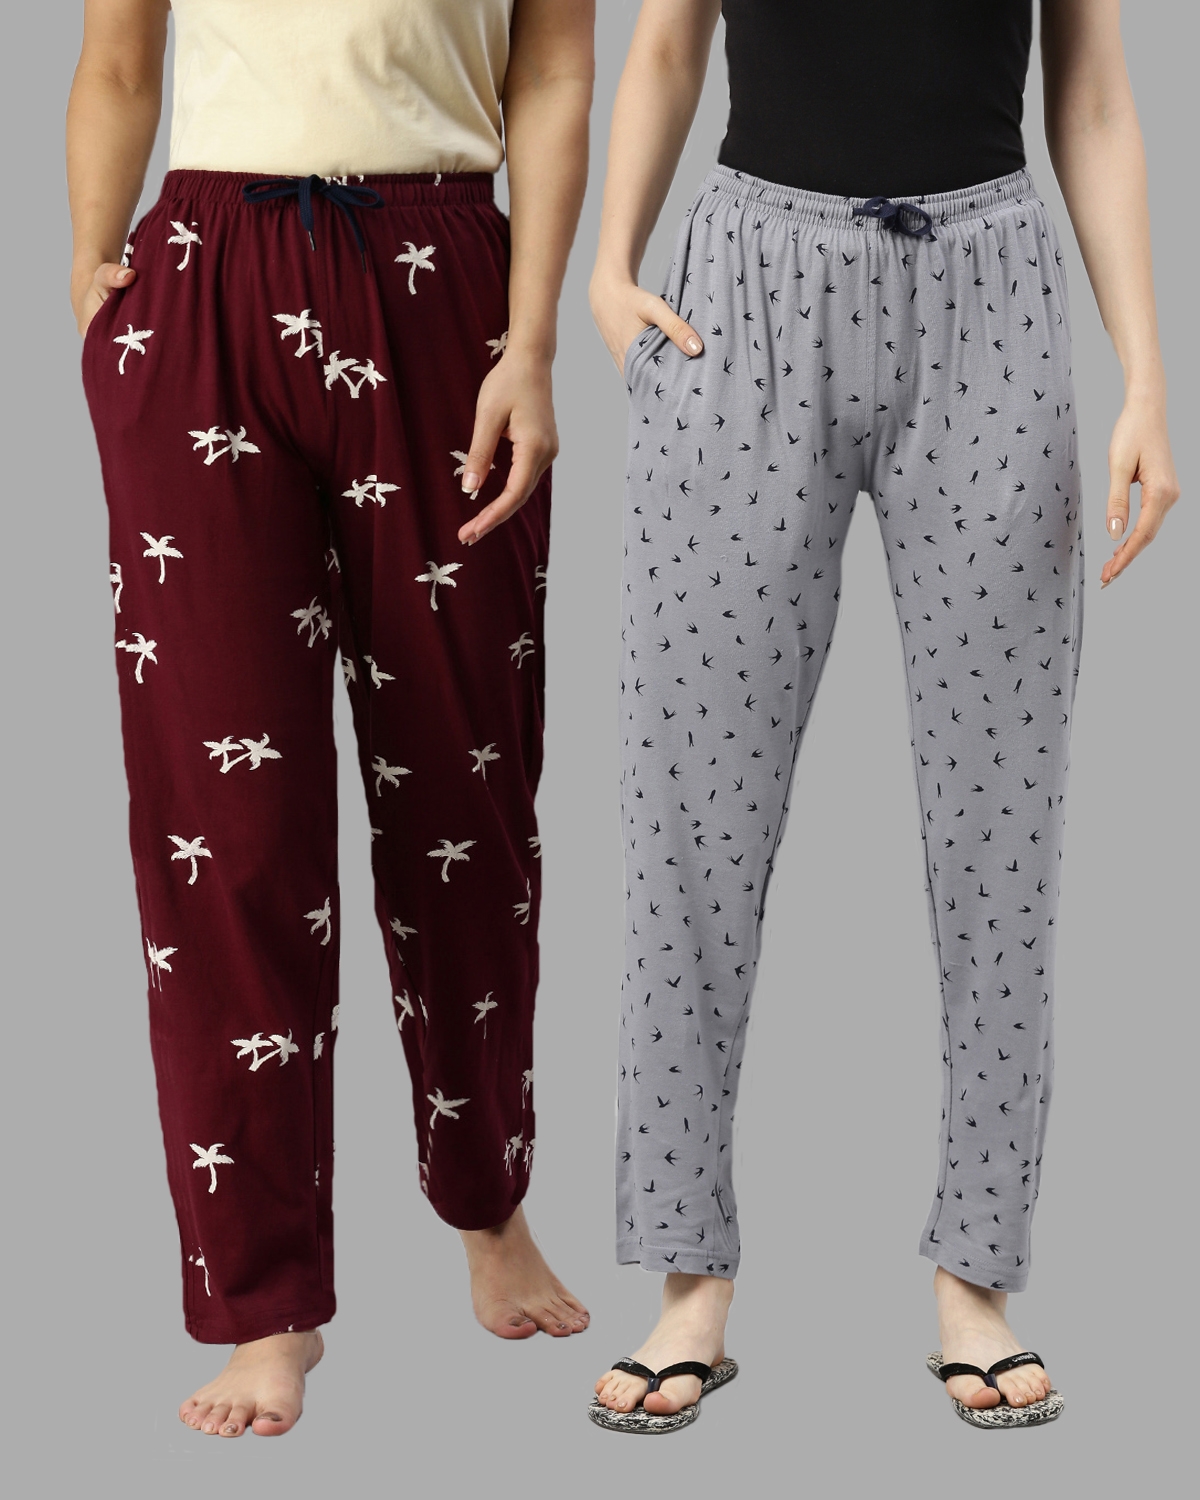 Kryptic | Kryptic Womens 100% Cotton Full Length Lounge Pants - Pack of 2